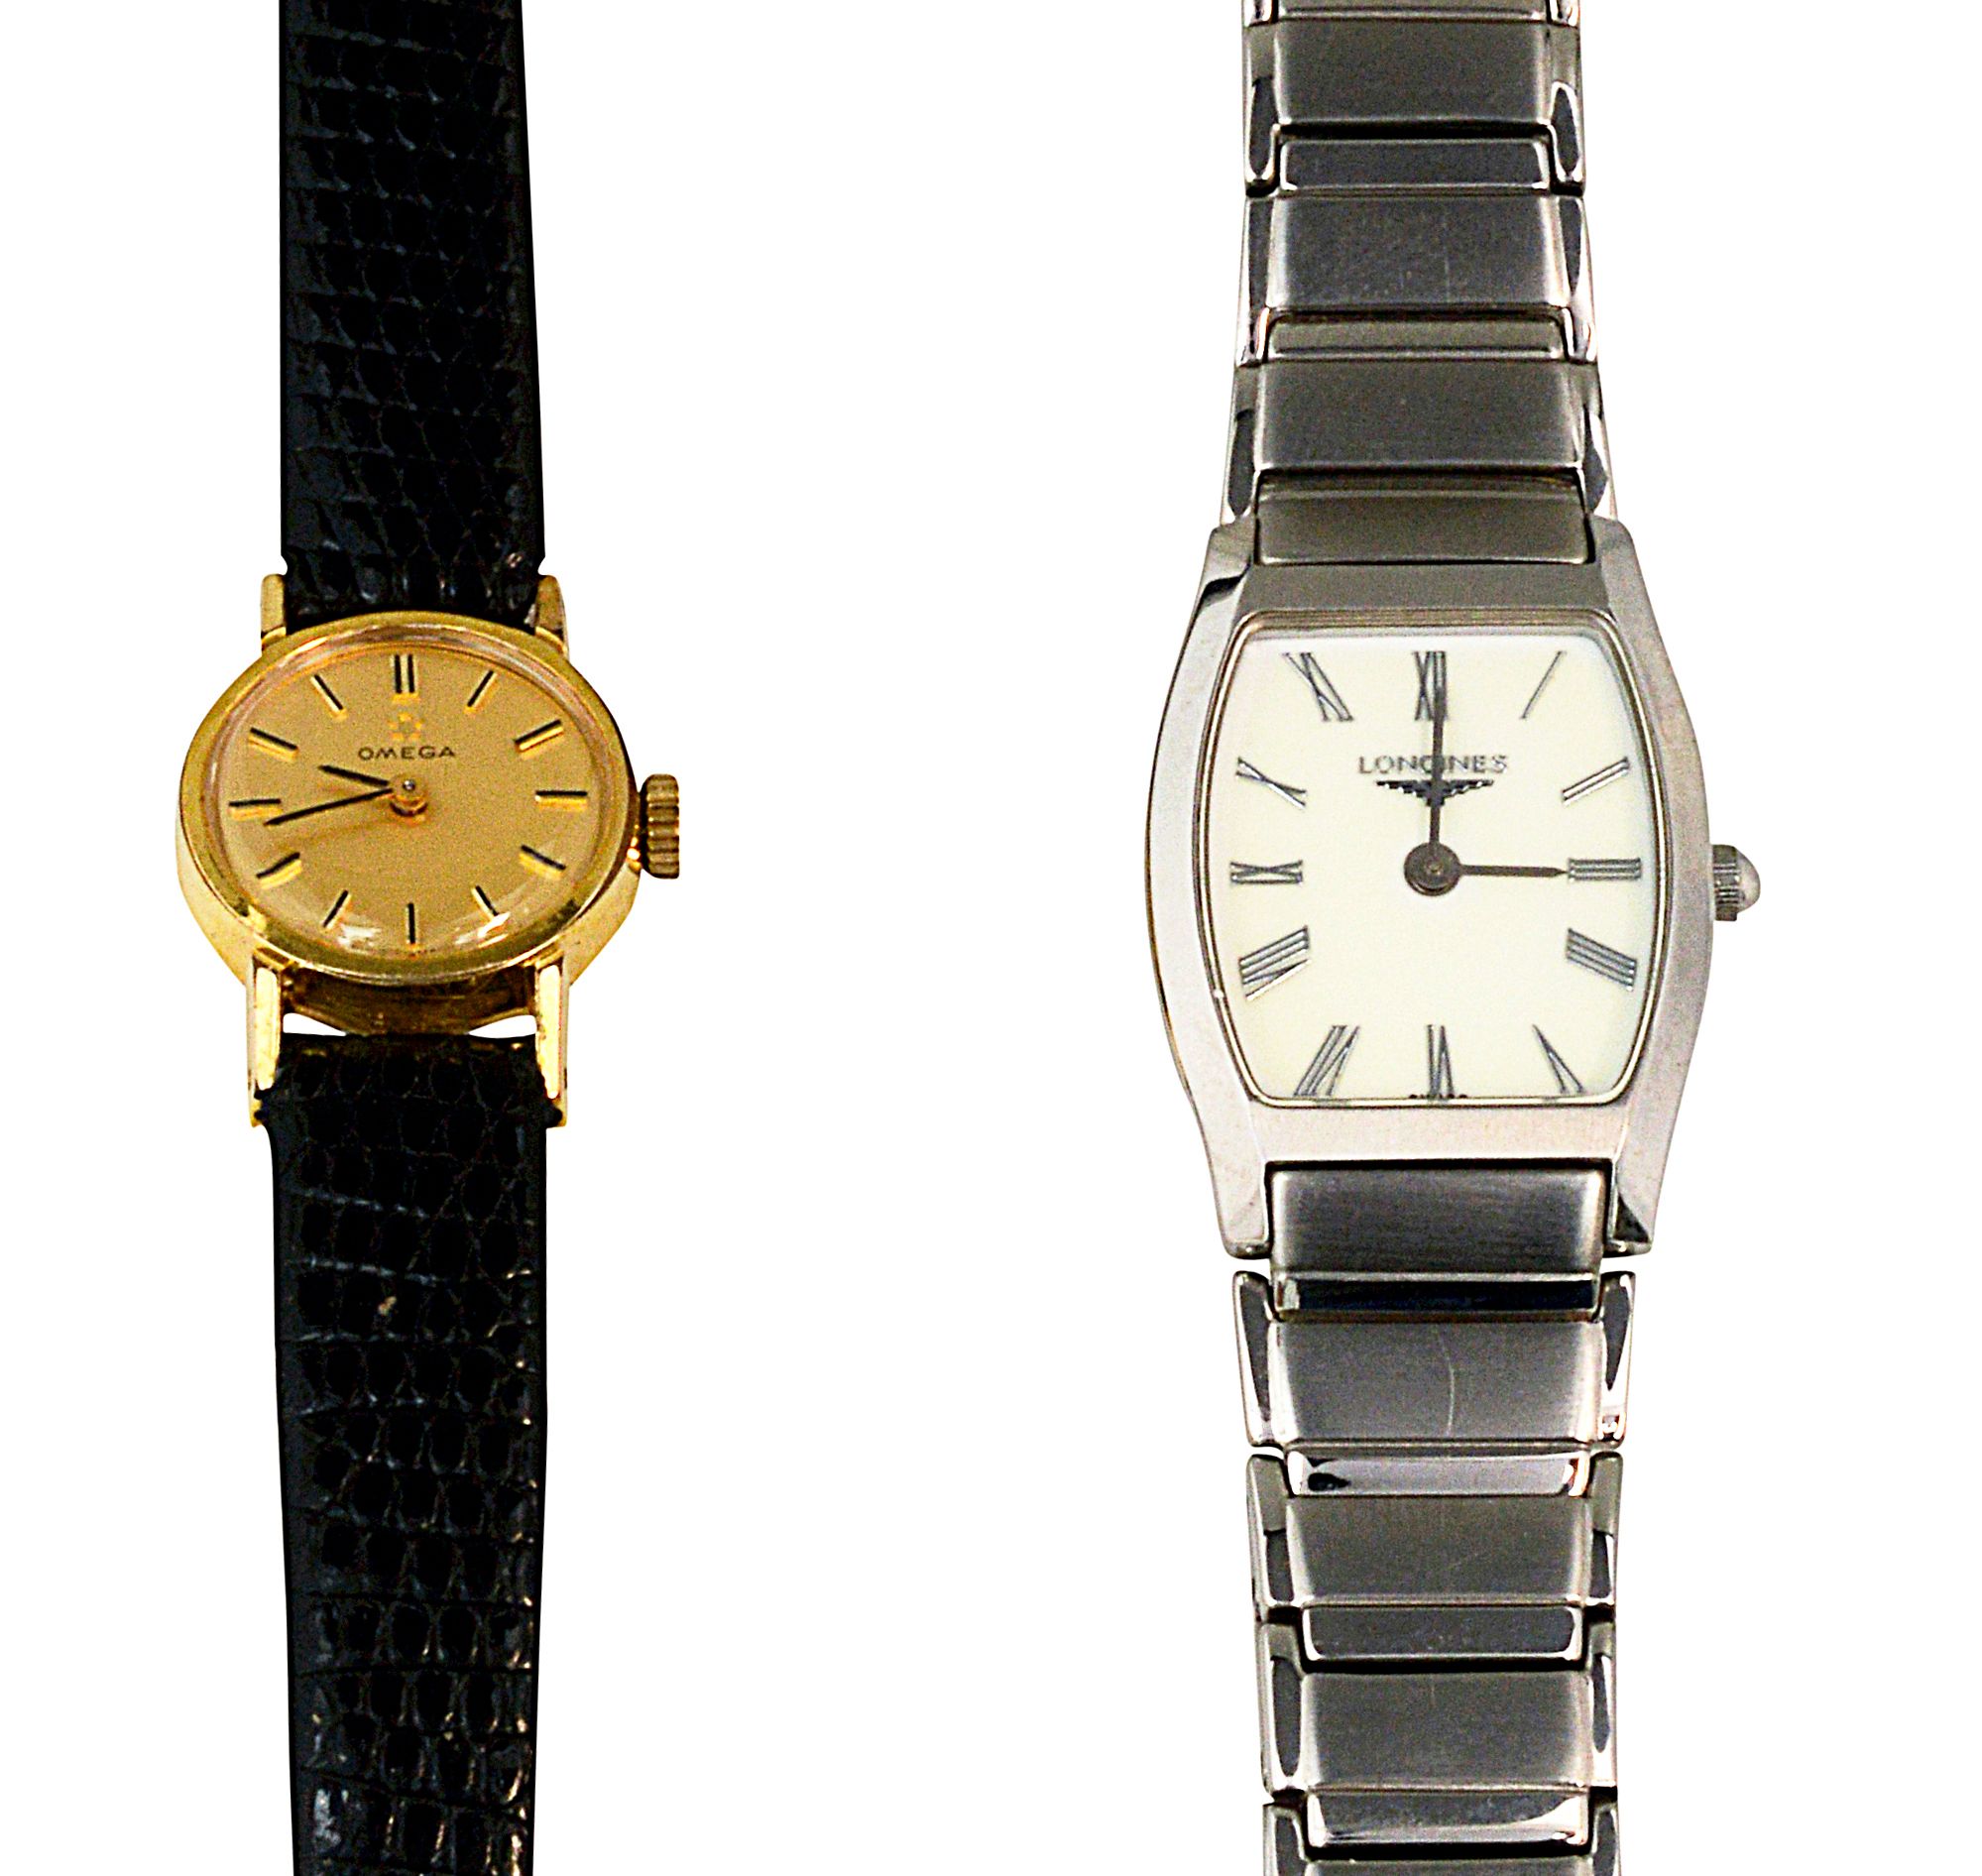 A gold plated Omega and a stainless steel Longines - Image 2 of 2